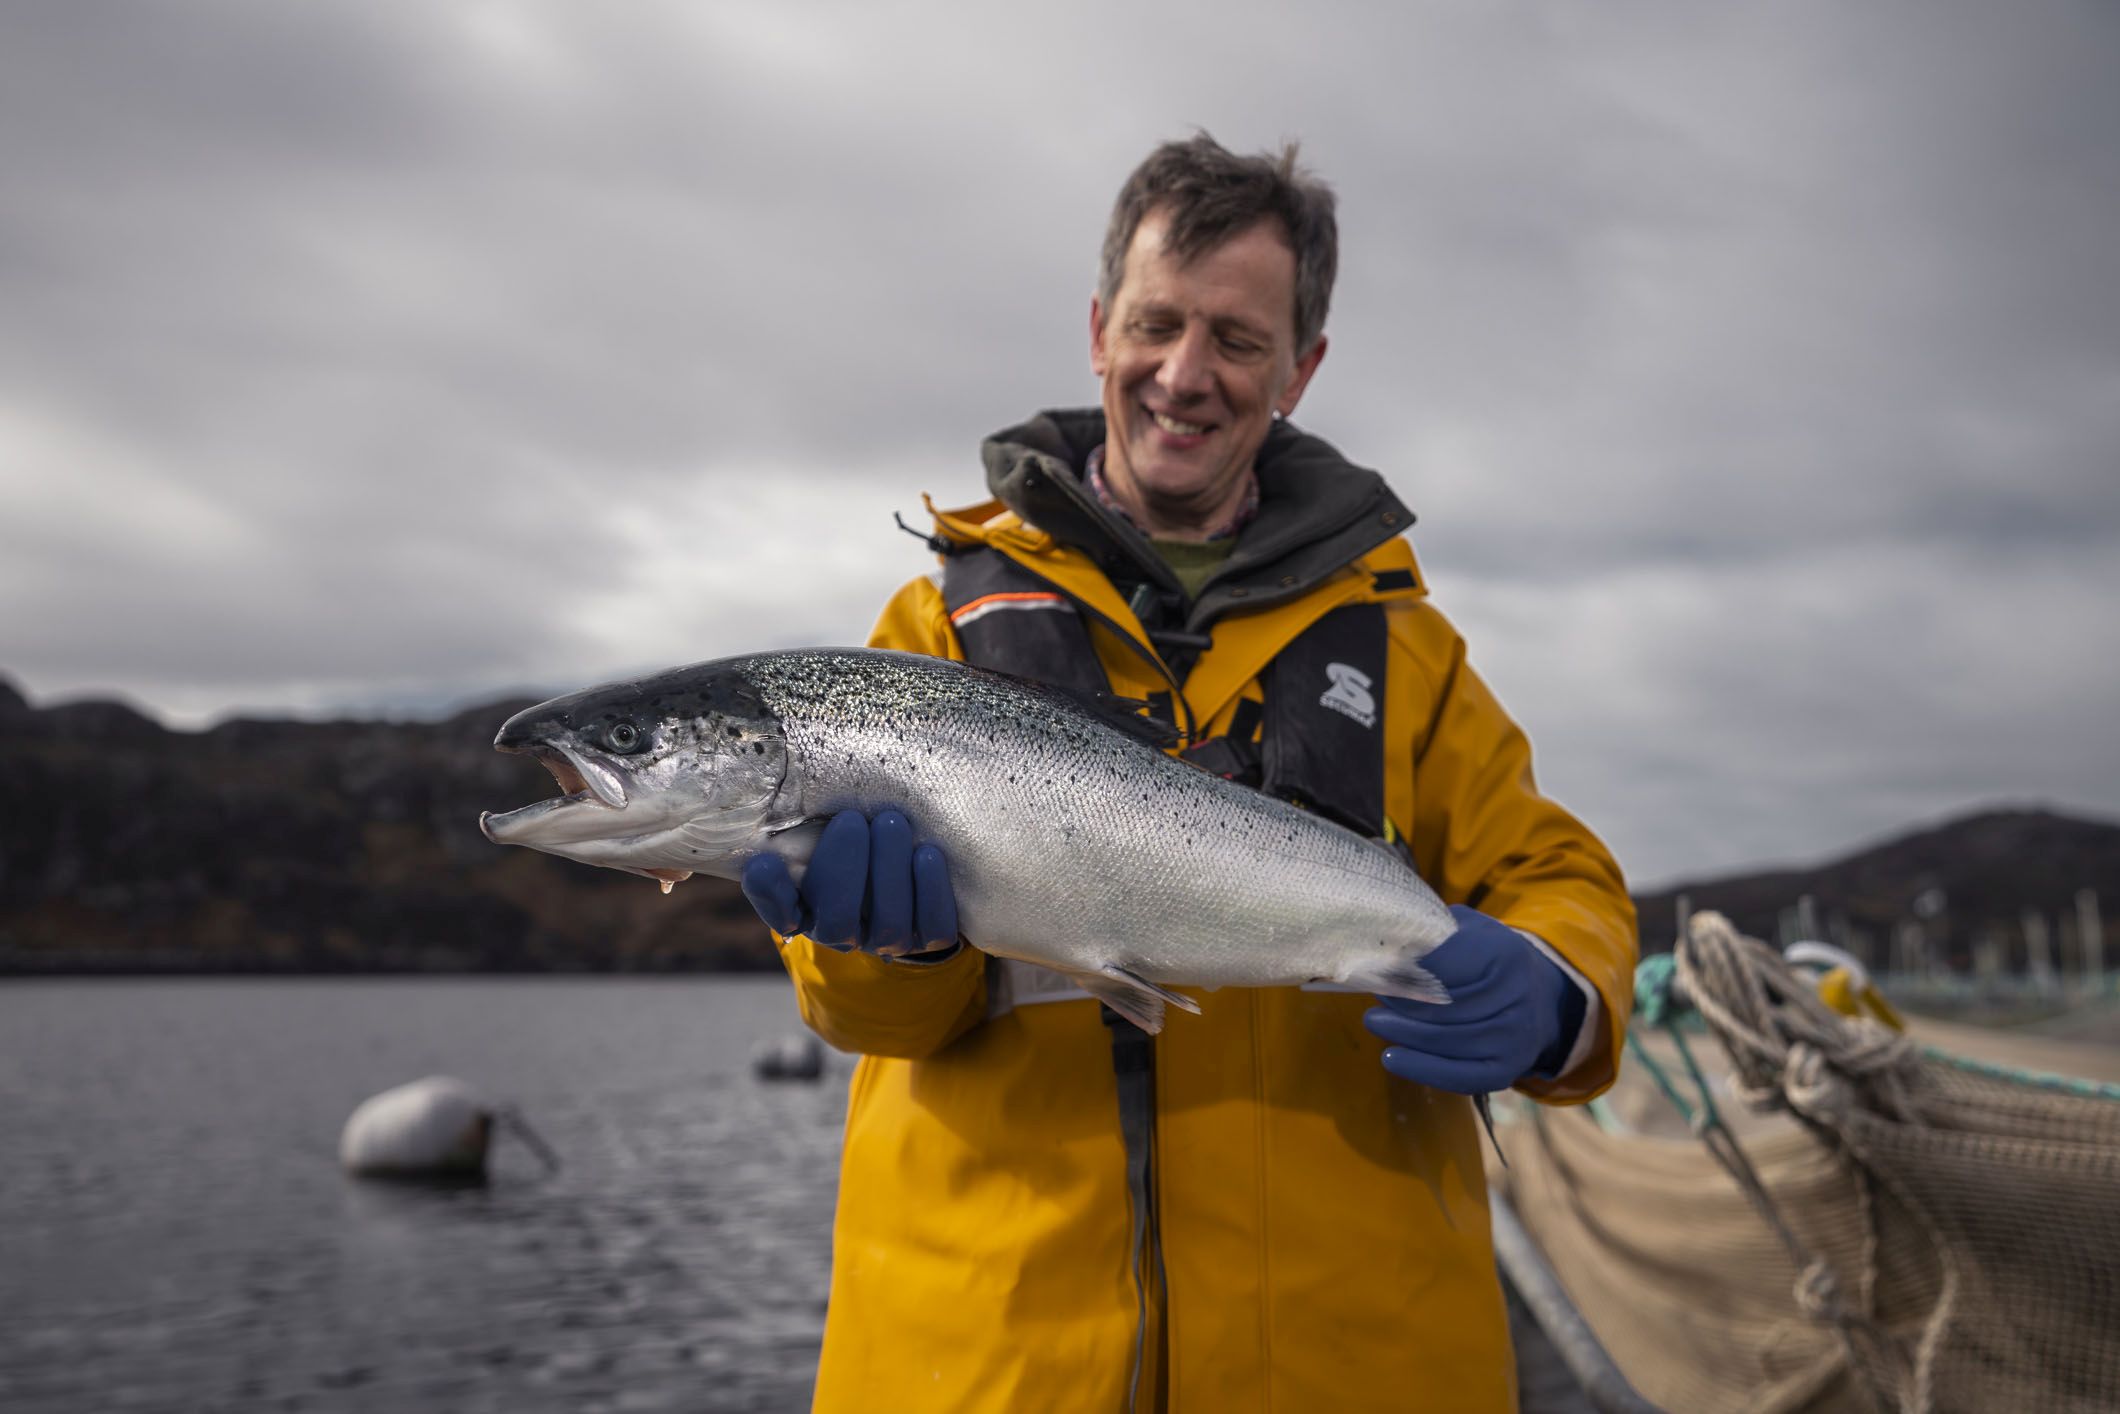 Loch Duart's Andy Bing with a healthy salmon - the company is involved in a gill health research project